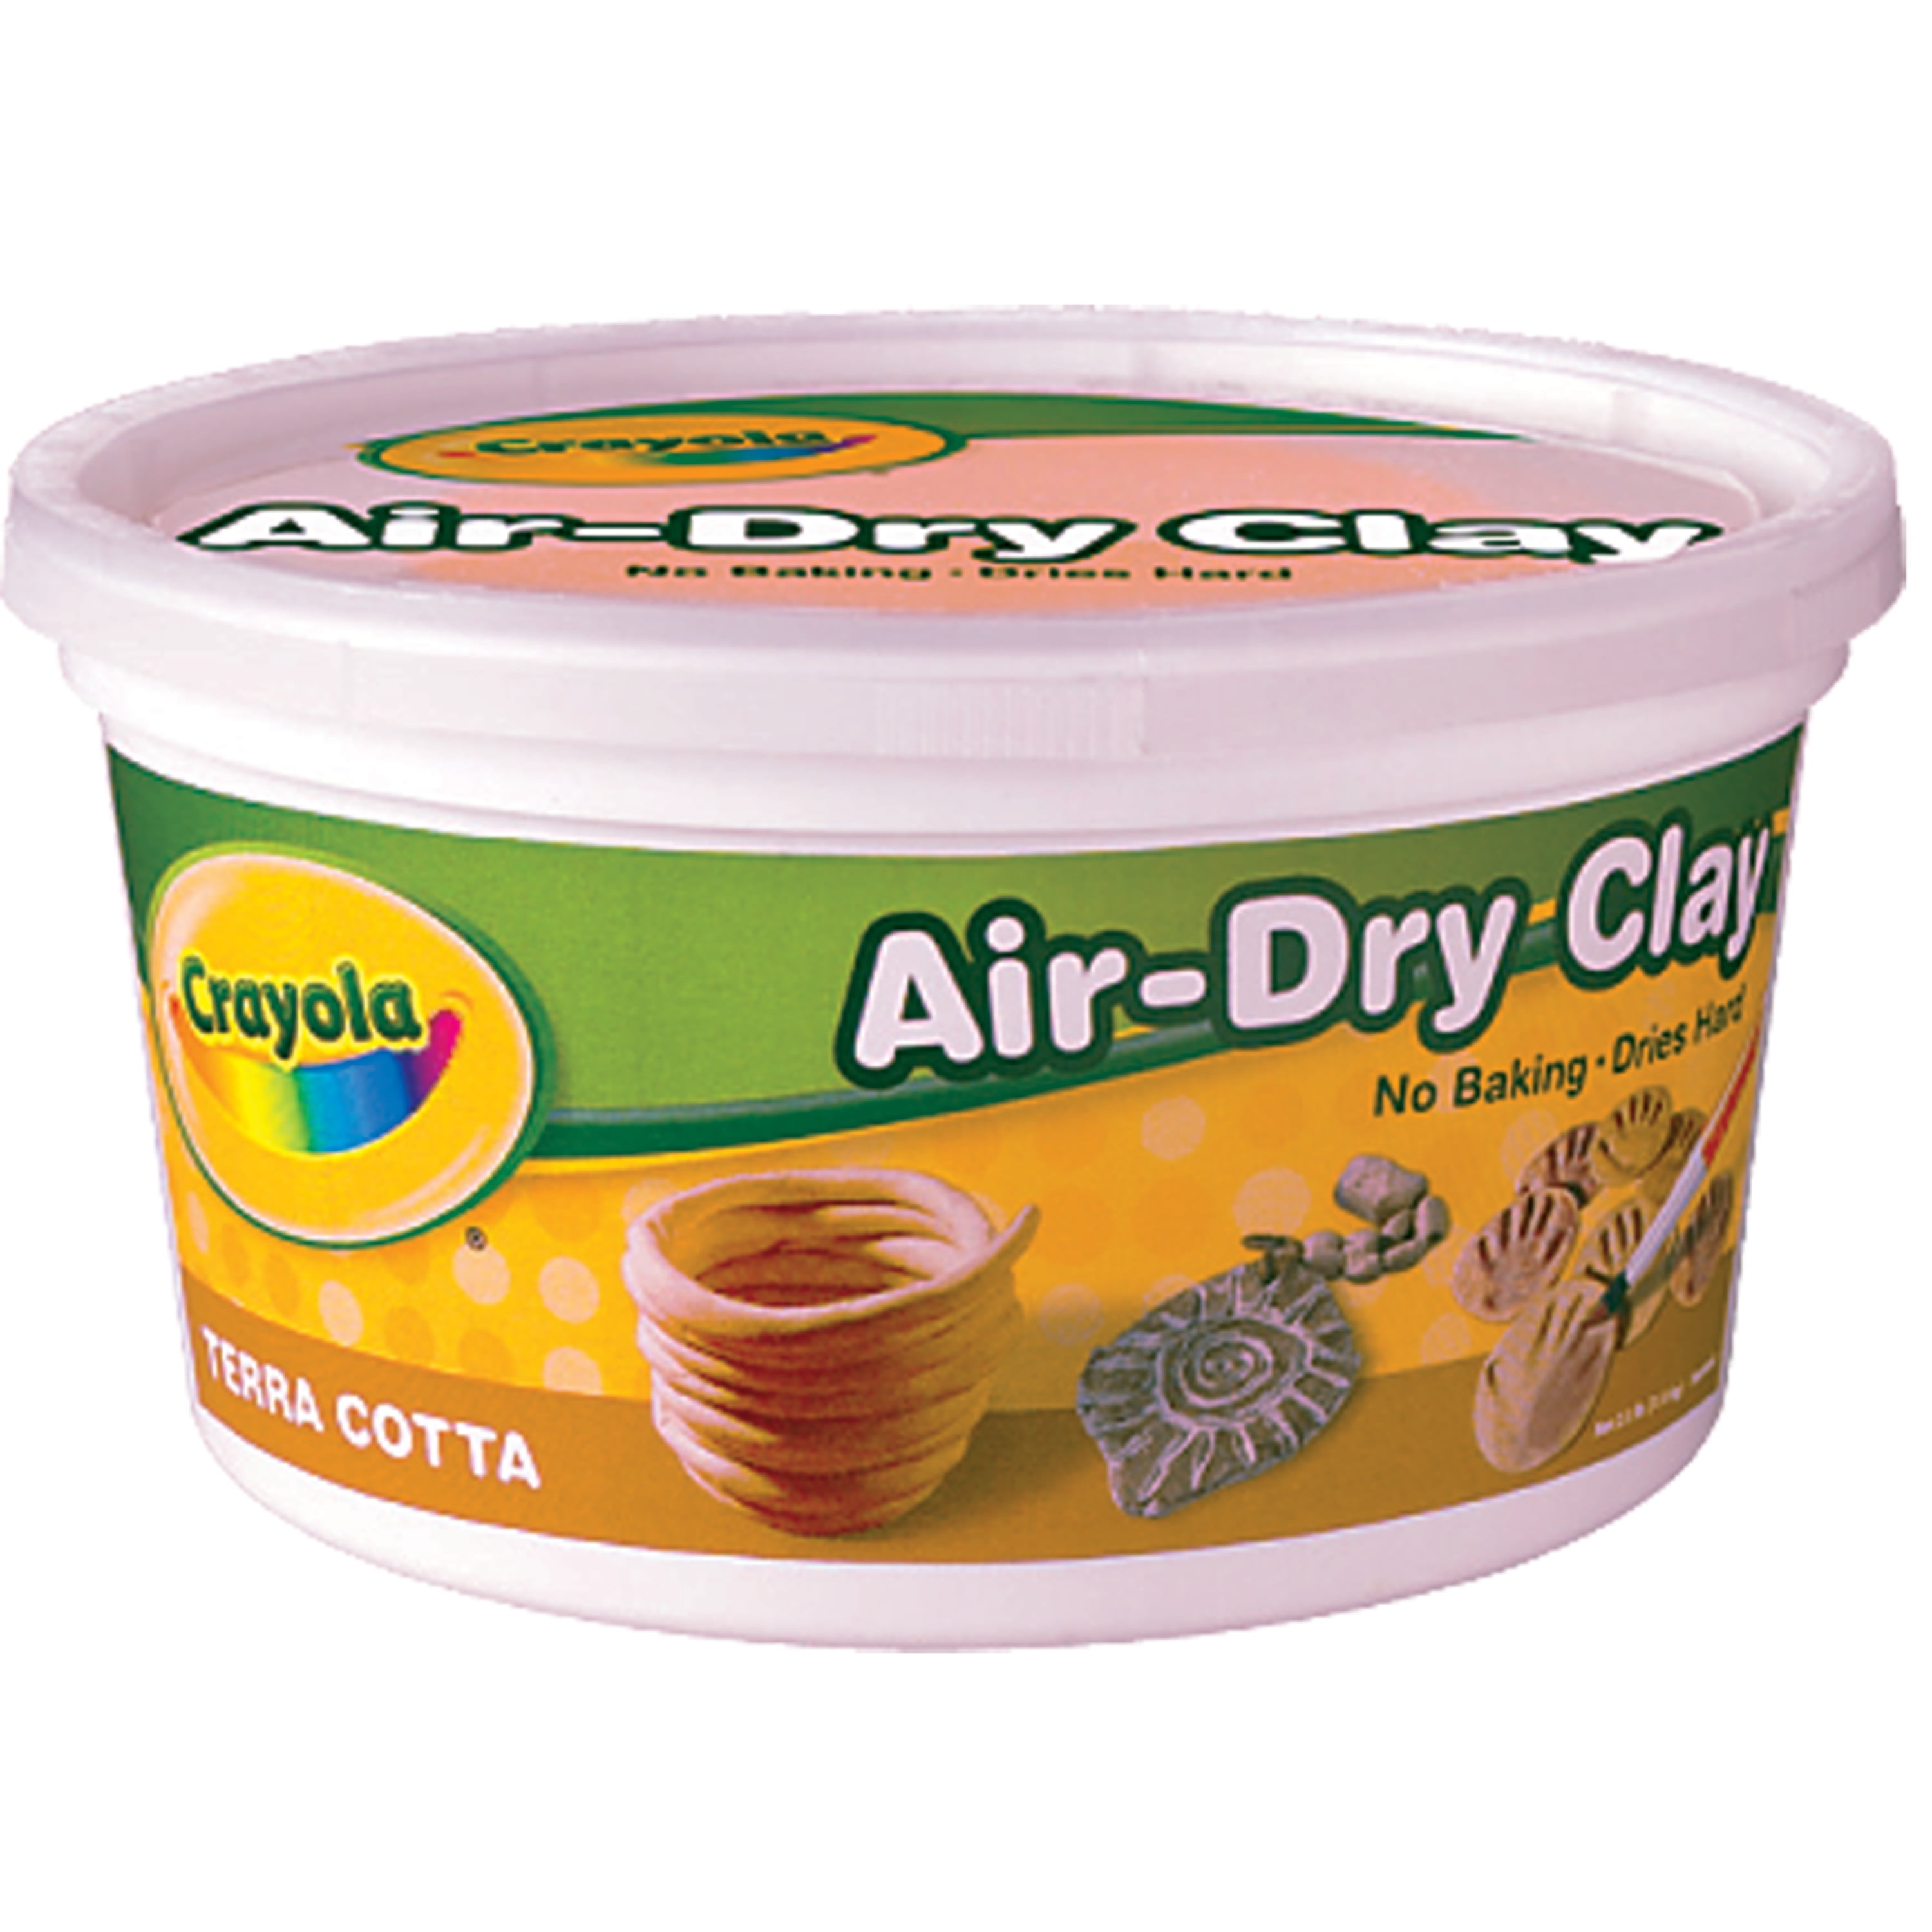 air dry clay price